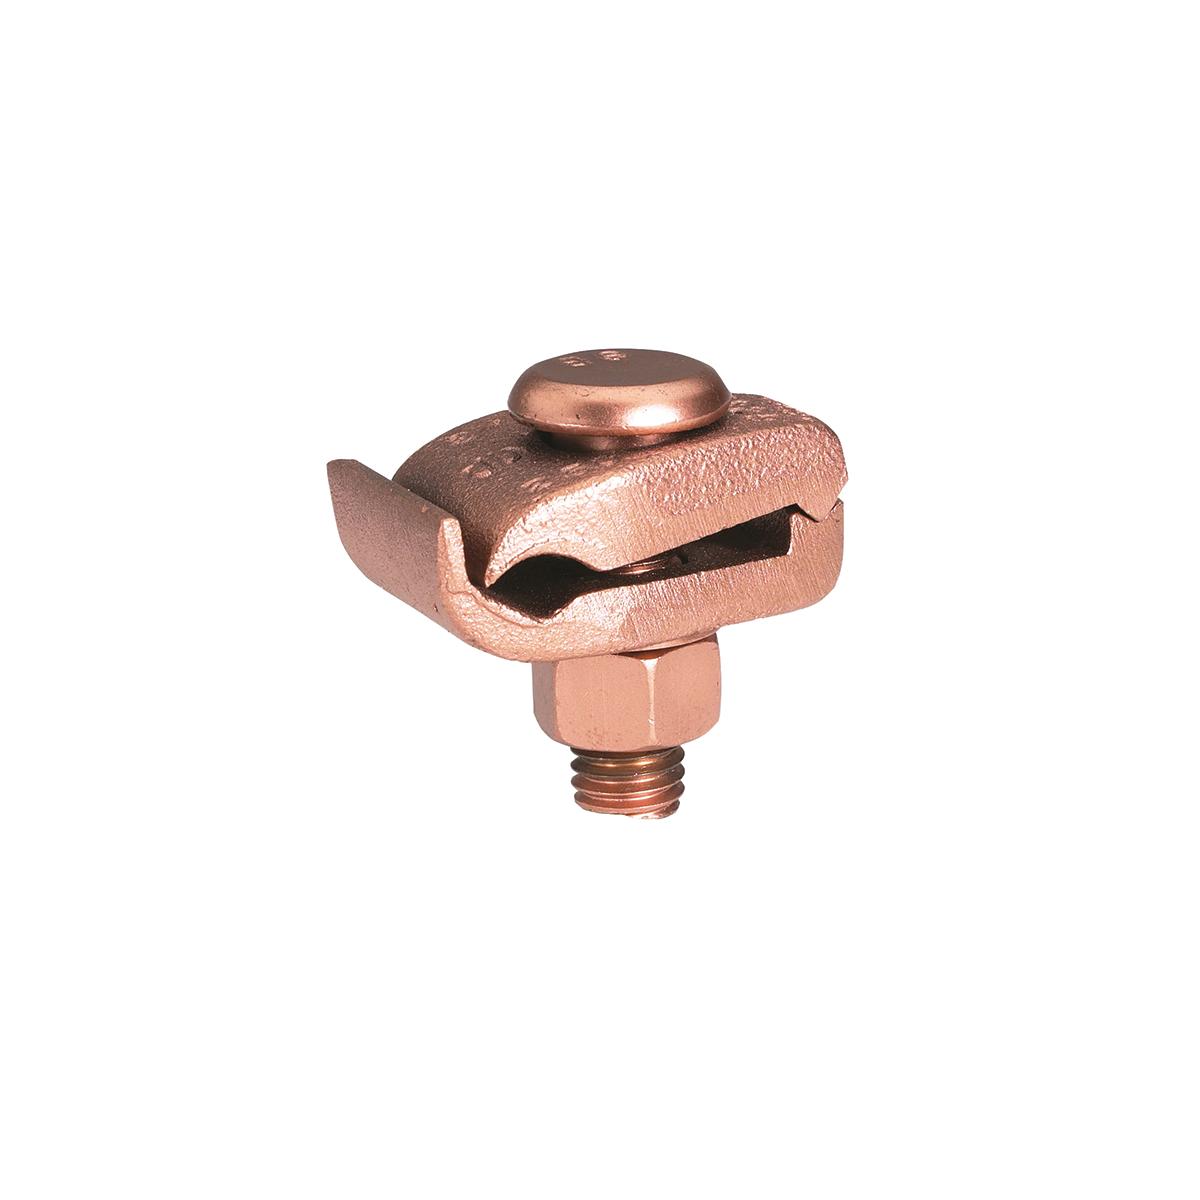 Hubbell GB29 Mechanical Grounding Connector, Cable to 1/4" Thick Bar, 2/0 AWG (Sol) -250 kcmil, 1/2" Stud, 2 IN Width.  ; Features: High Copper Alloy Ground Connector For Joining A Range Of Cable To 1/4 IN Thick Bar, Type GB Separates Cable From Bar, One-Wrench Instal